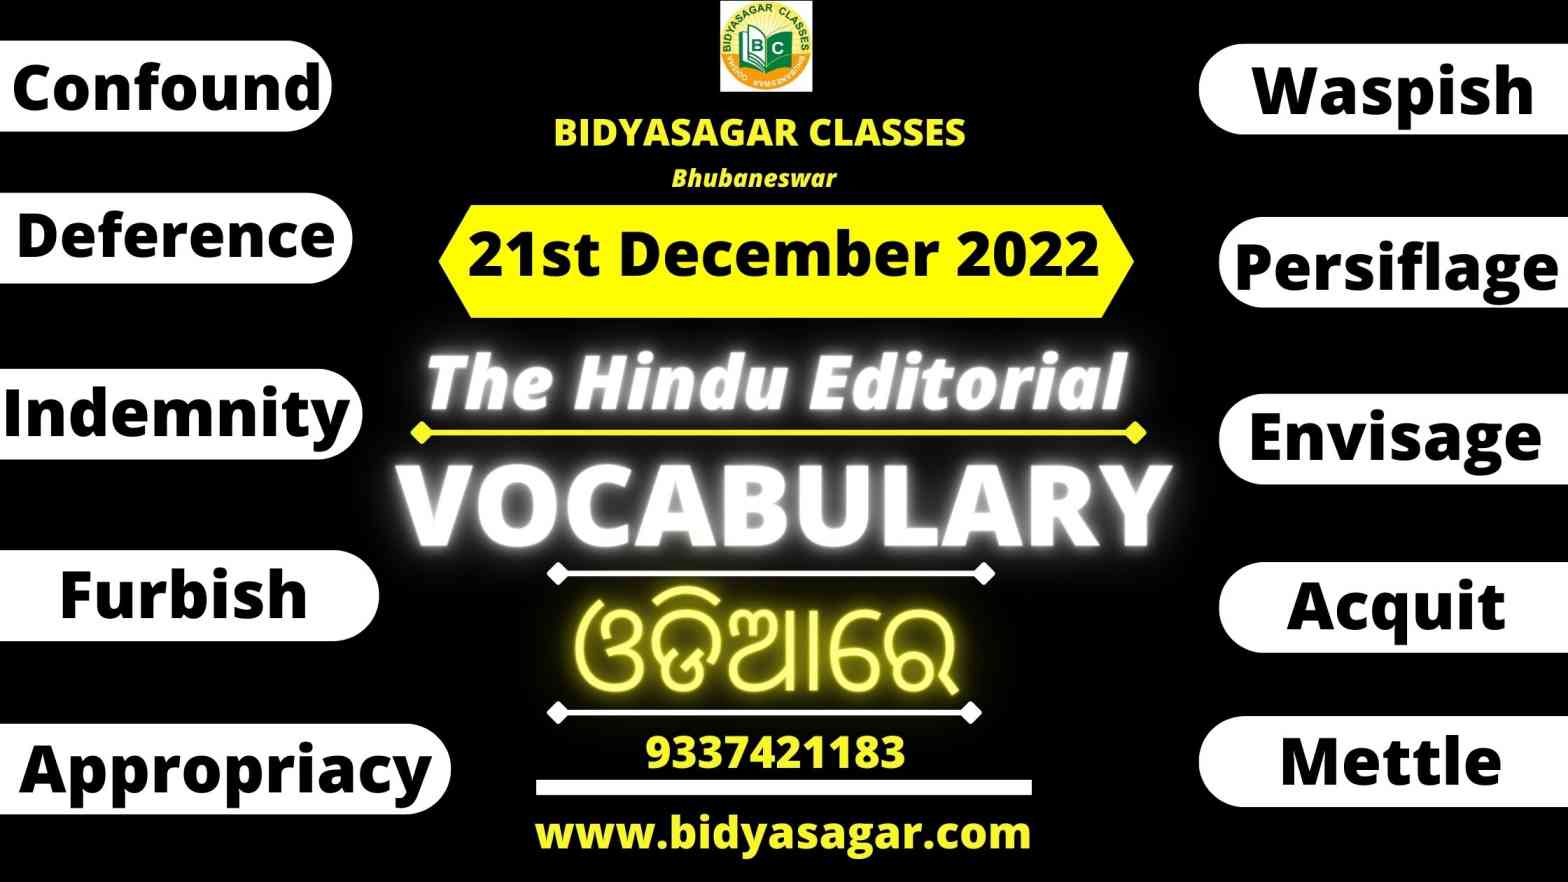 The Hindu Editorial Vocabulary of 21st december 2022